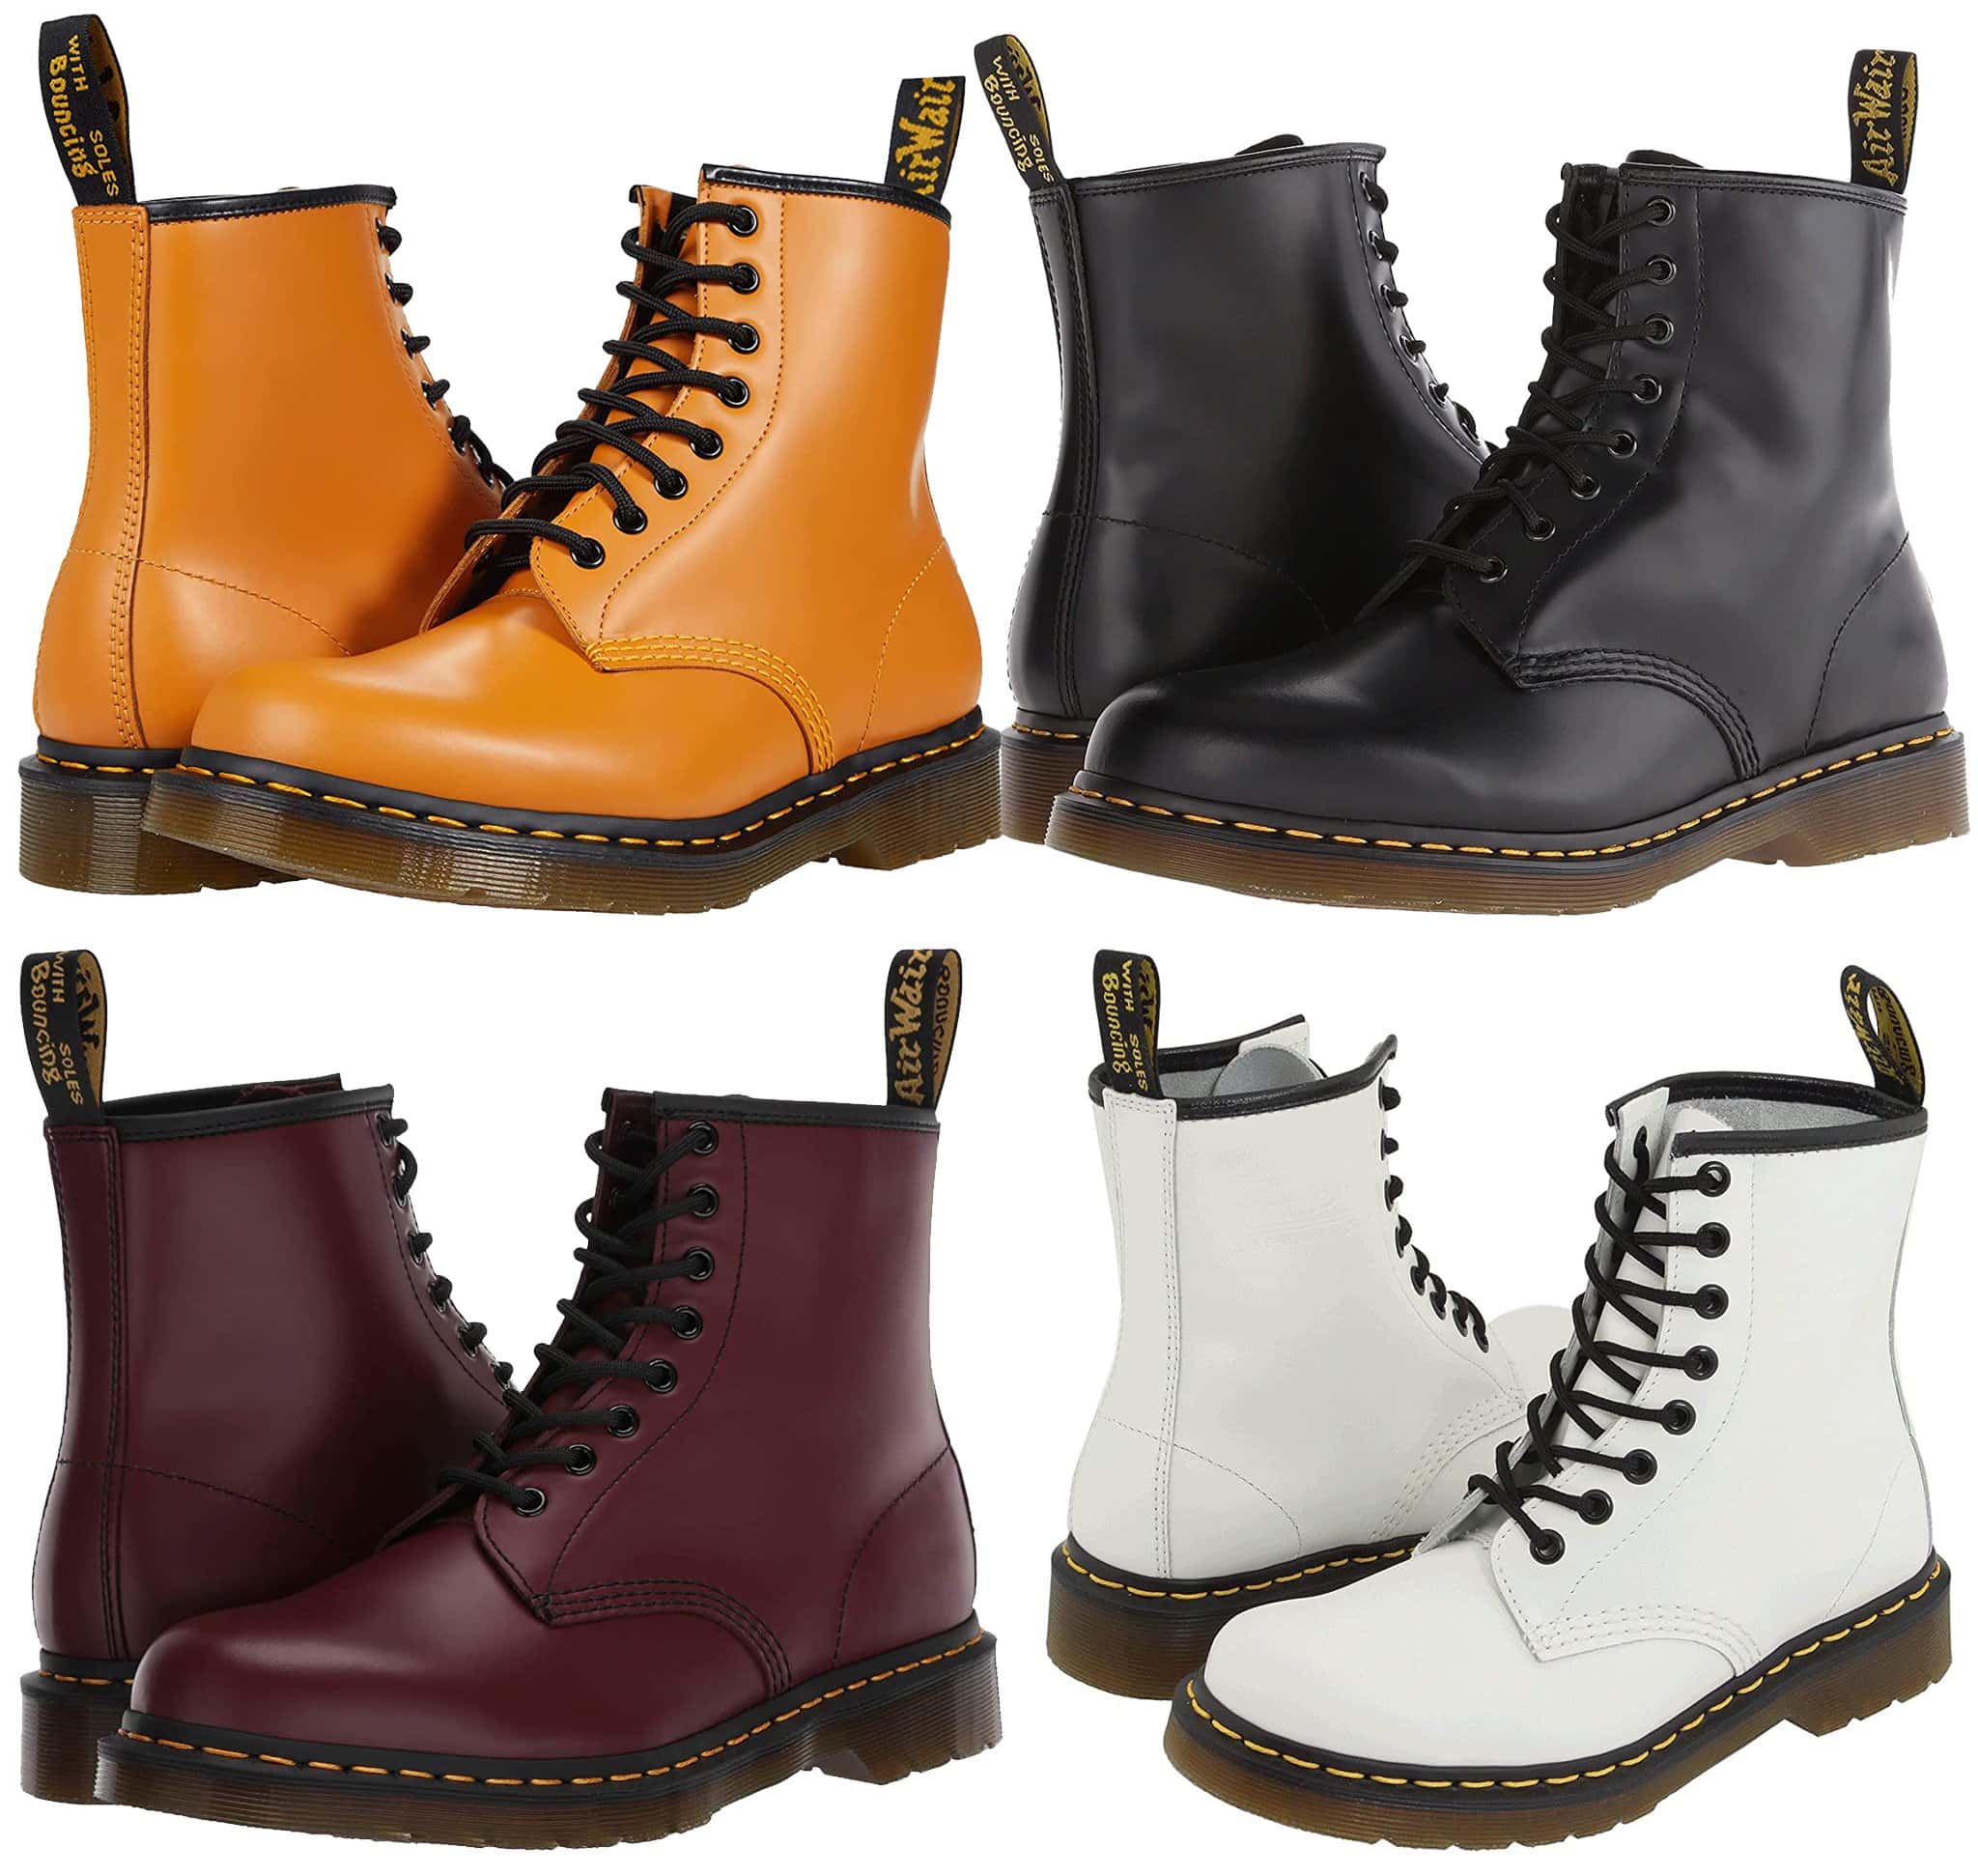 The Doc Martens 1460 is a unisex style that lends an effortless-cool vibe to any couple outfit